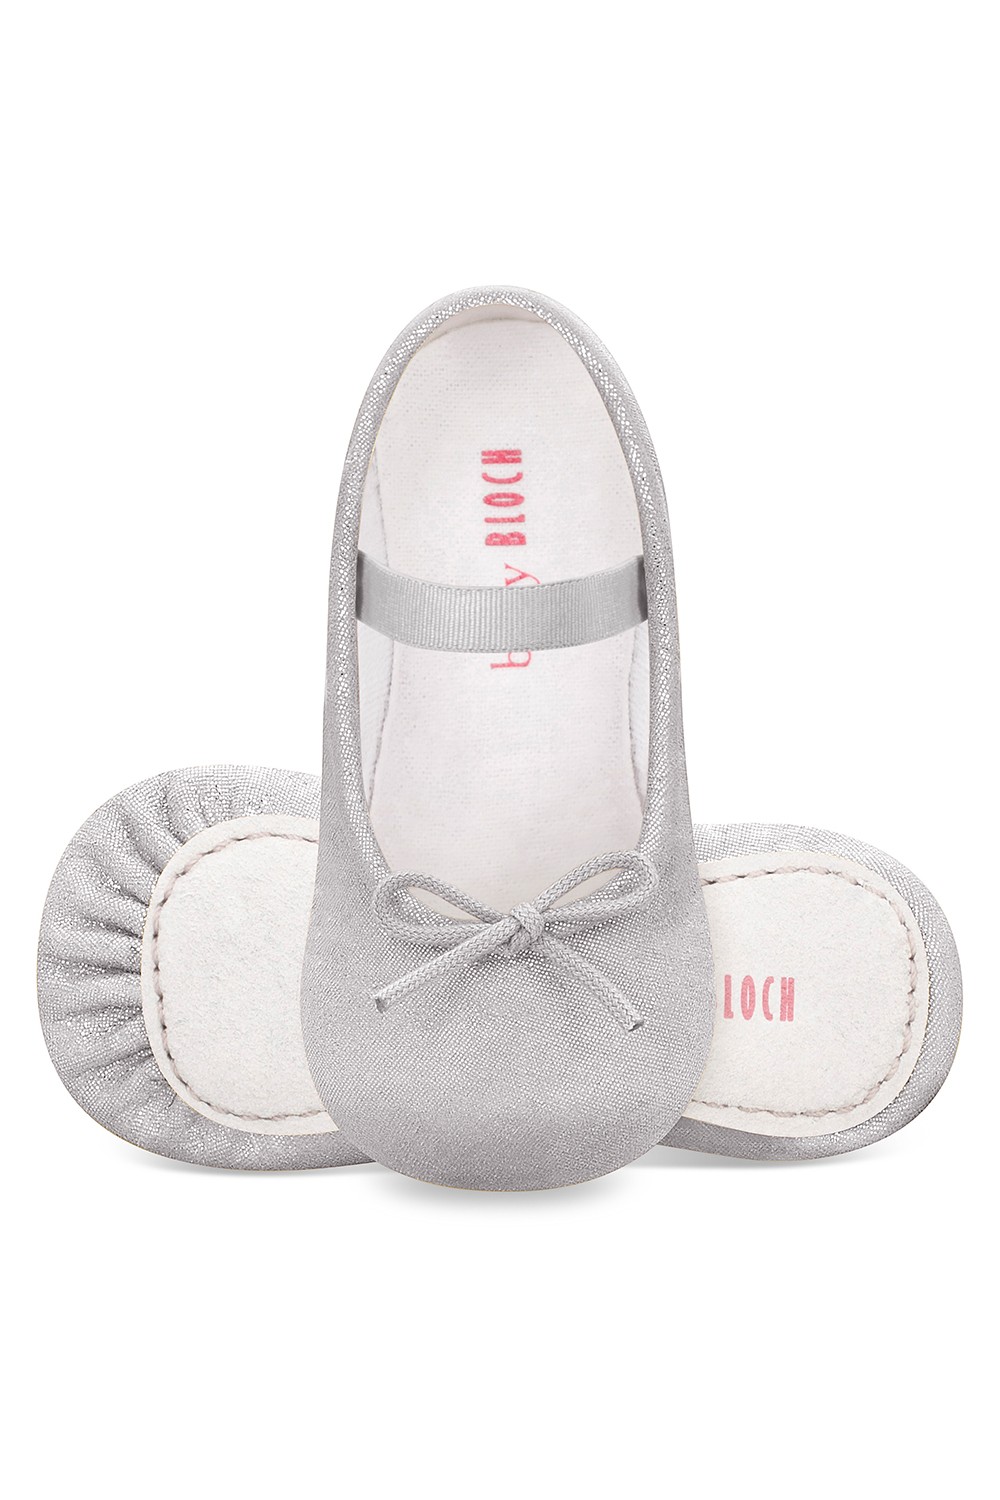 baby bloch shoes